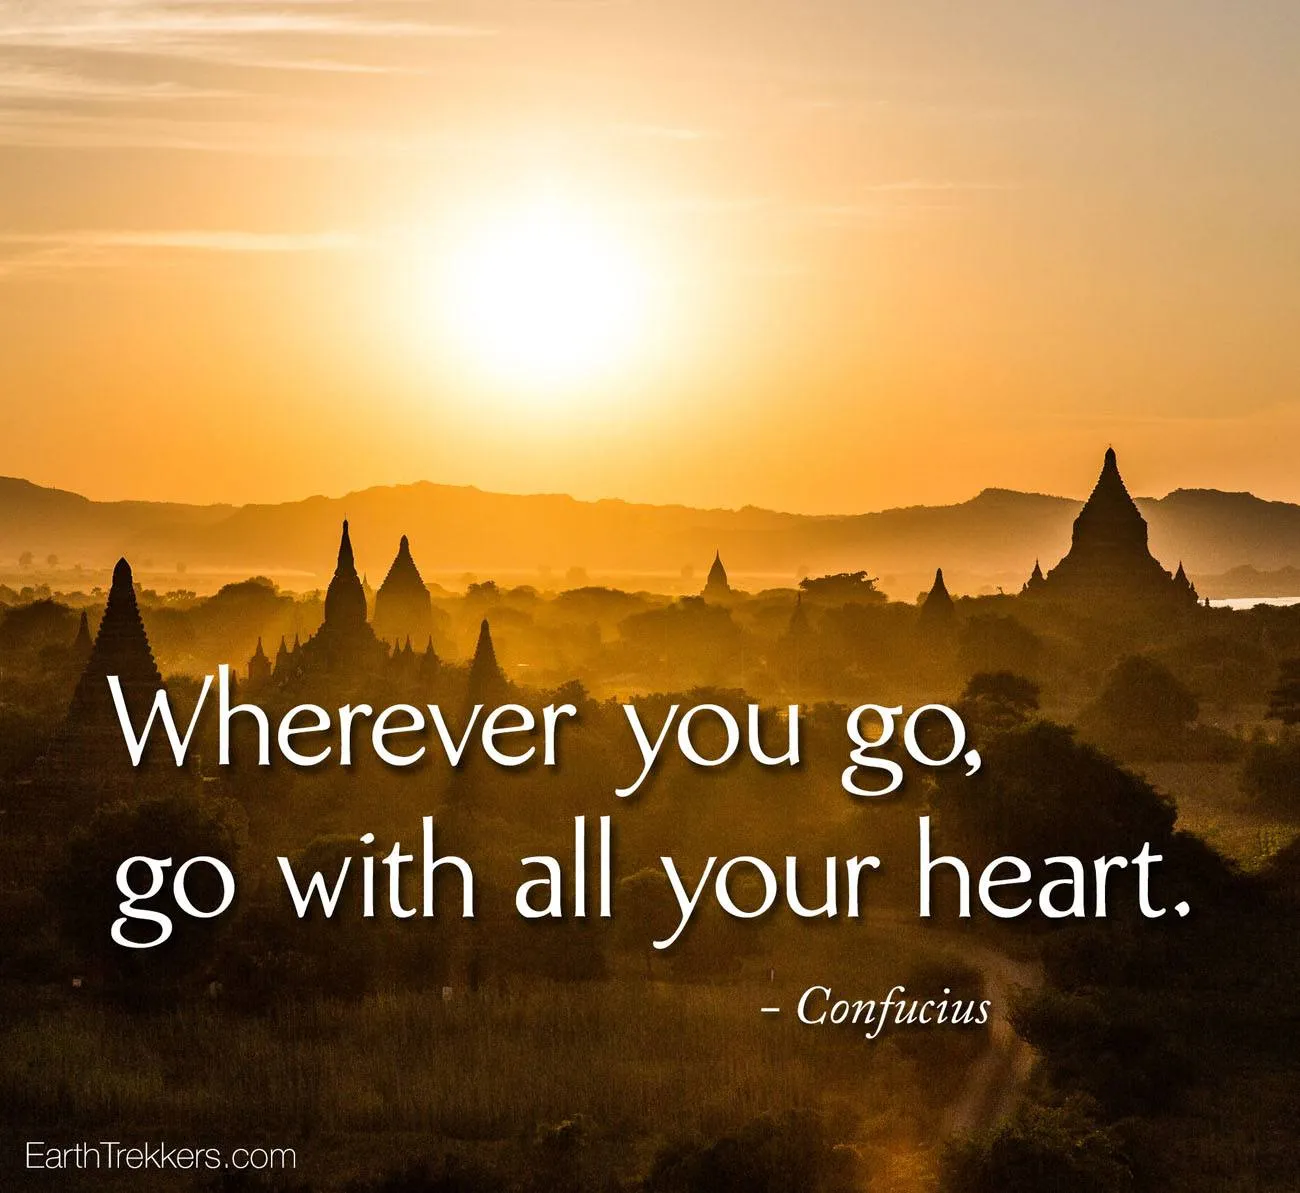 Go with all your heart confucius quote